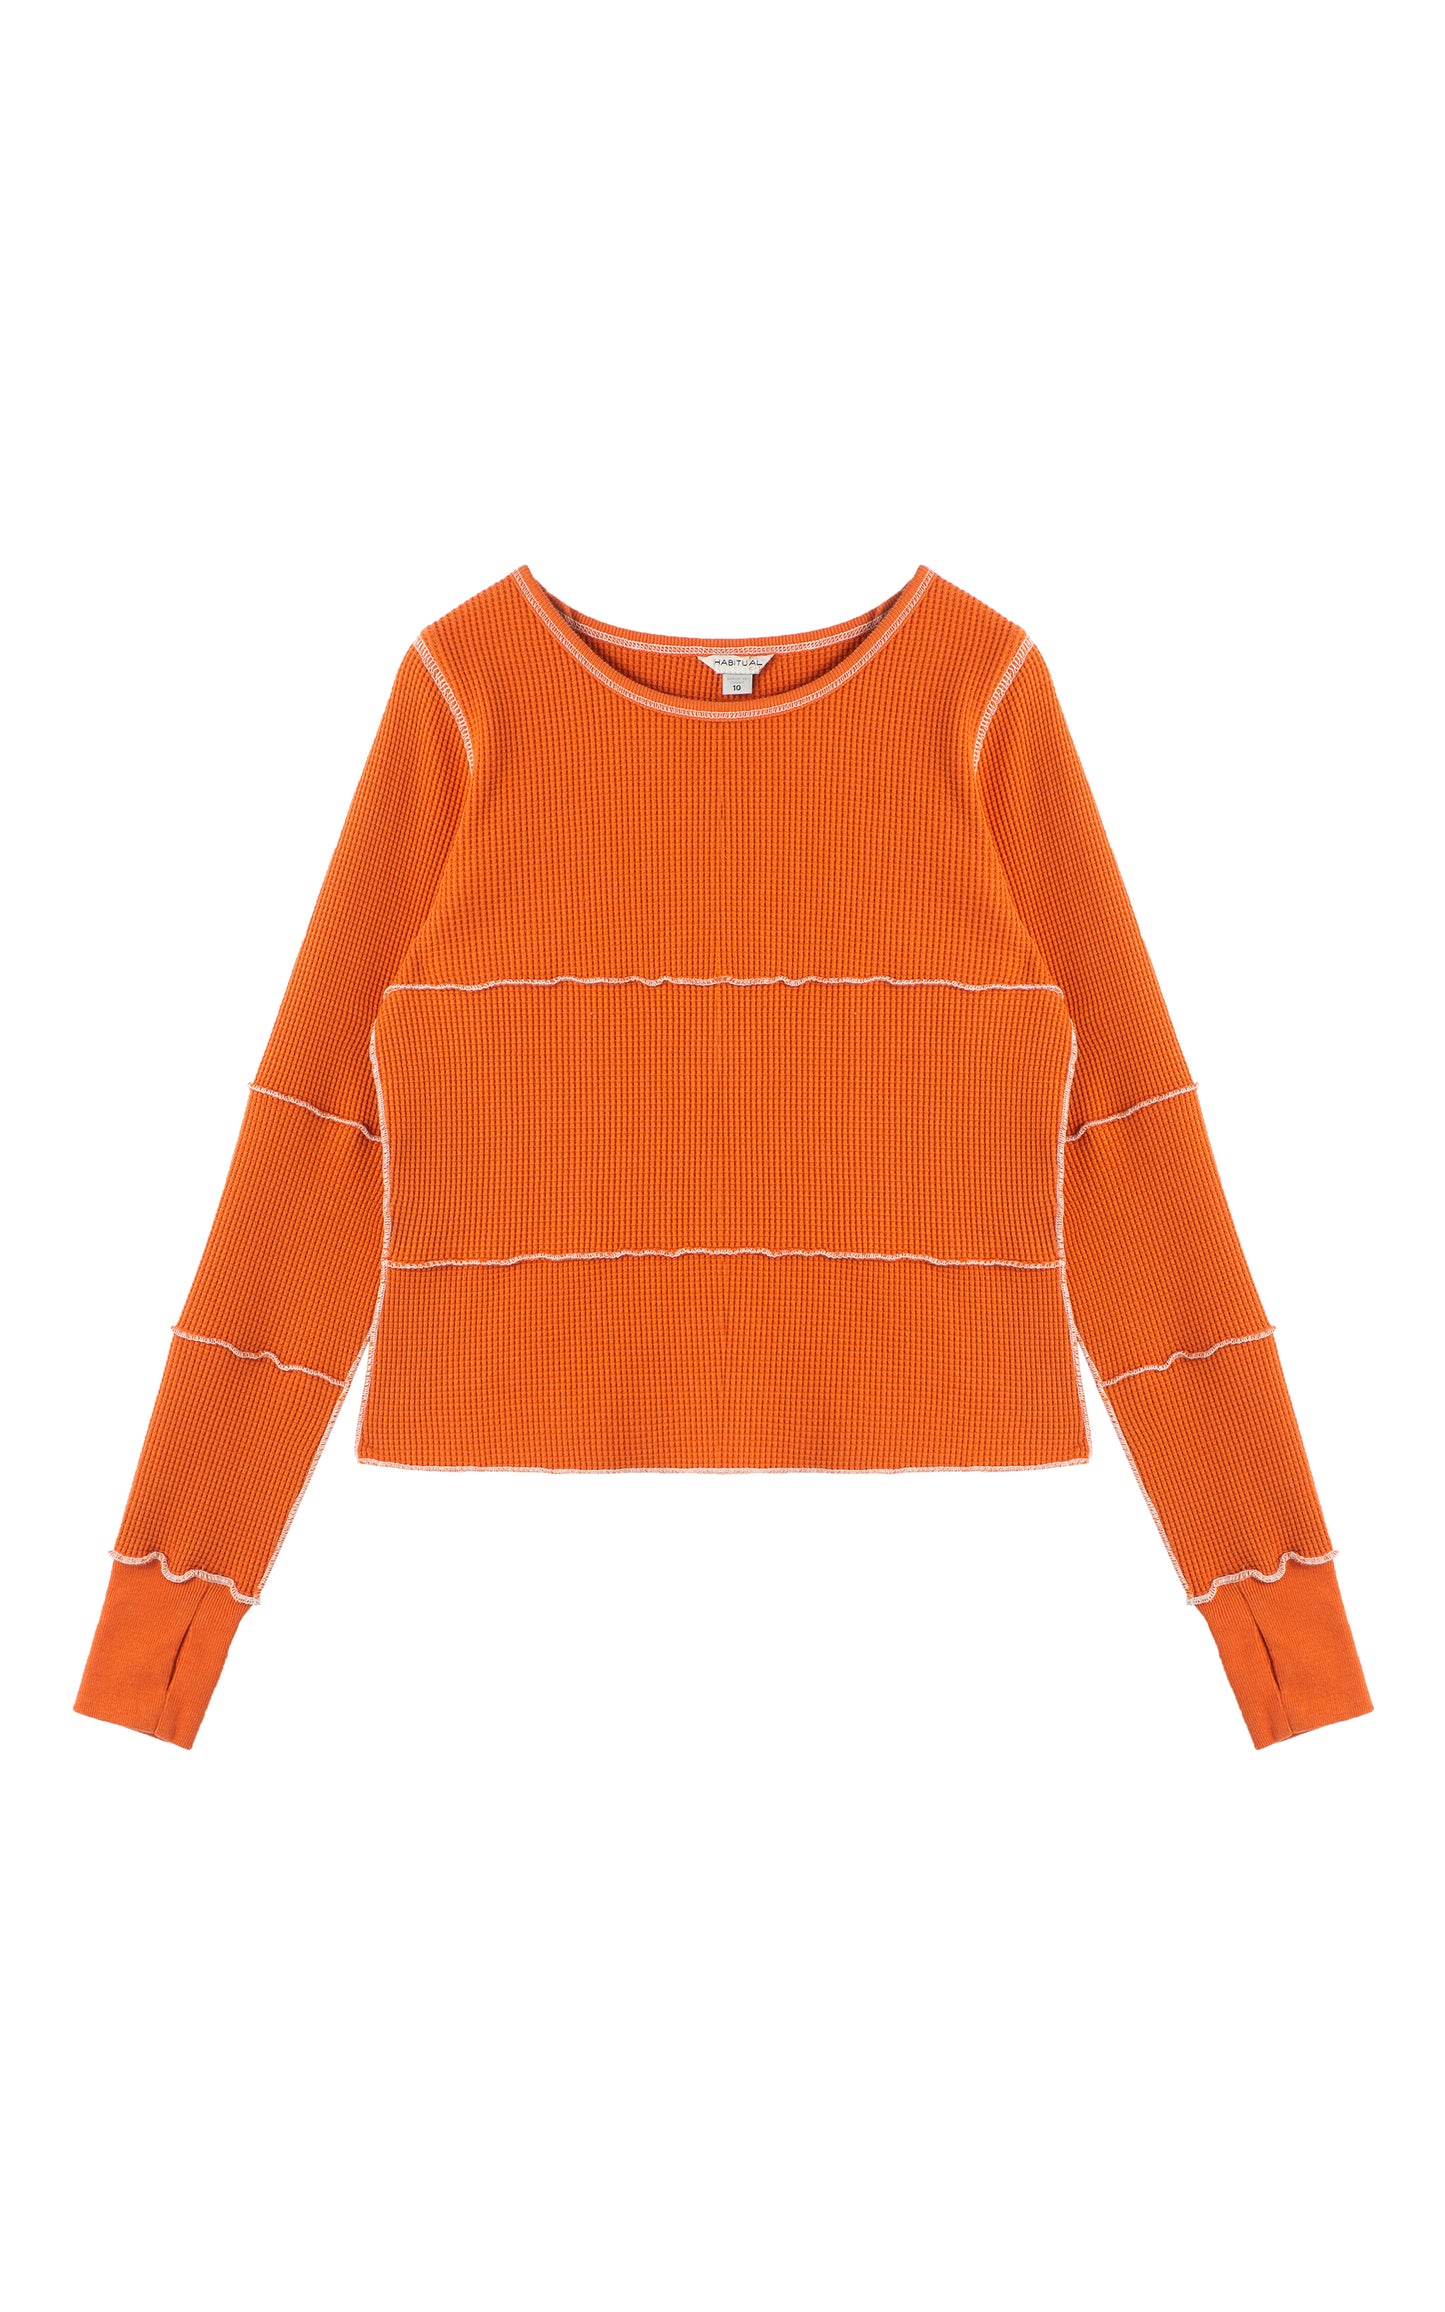 Front view of orange long sleeve with white stitching 